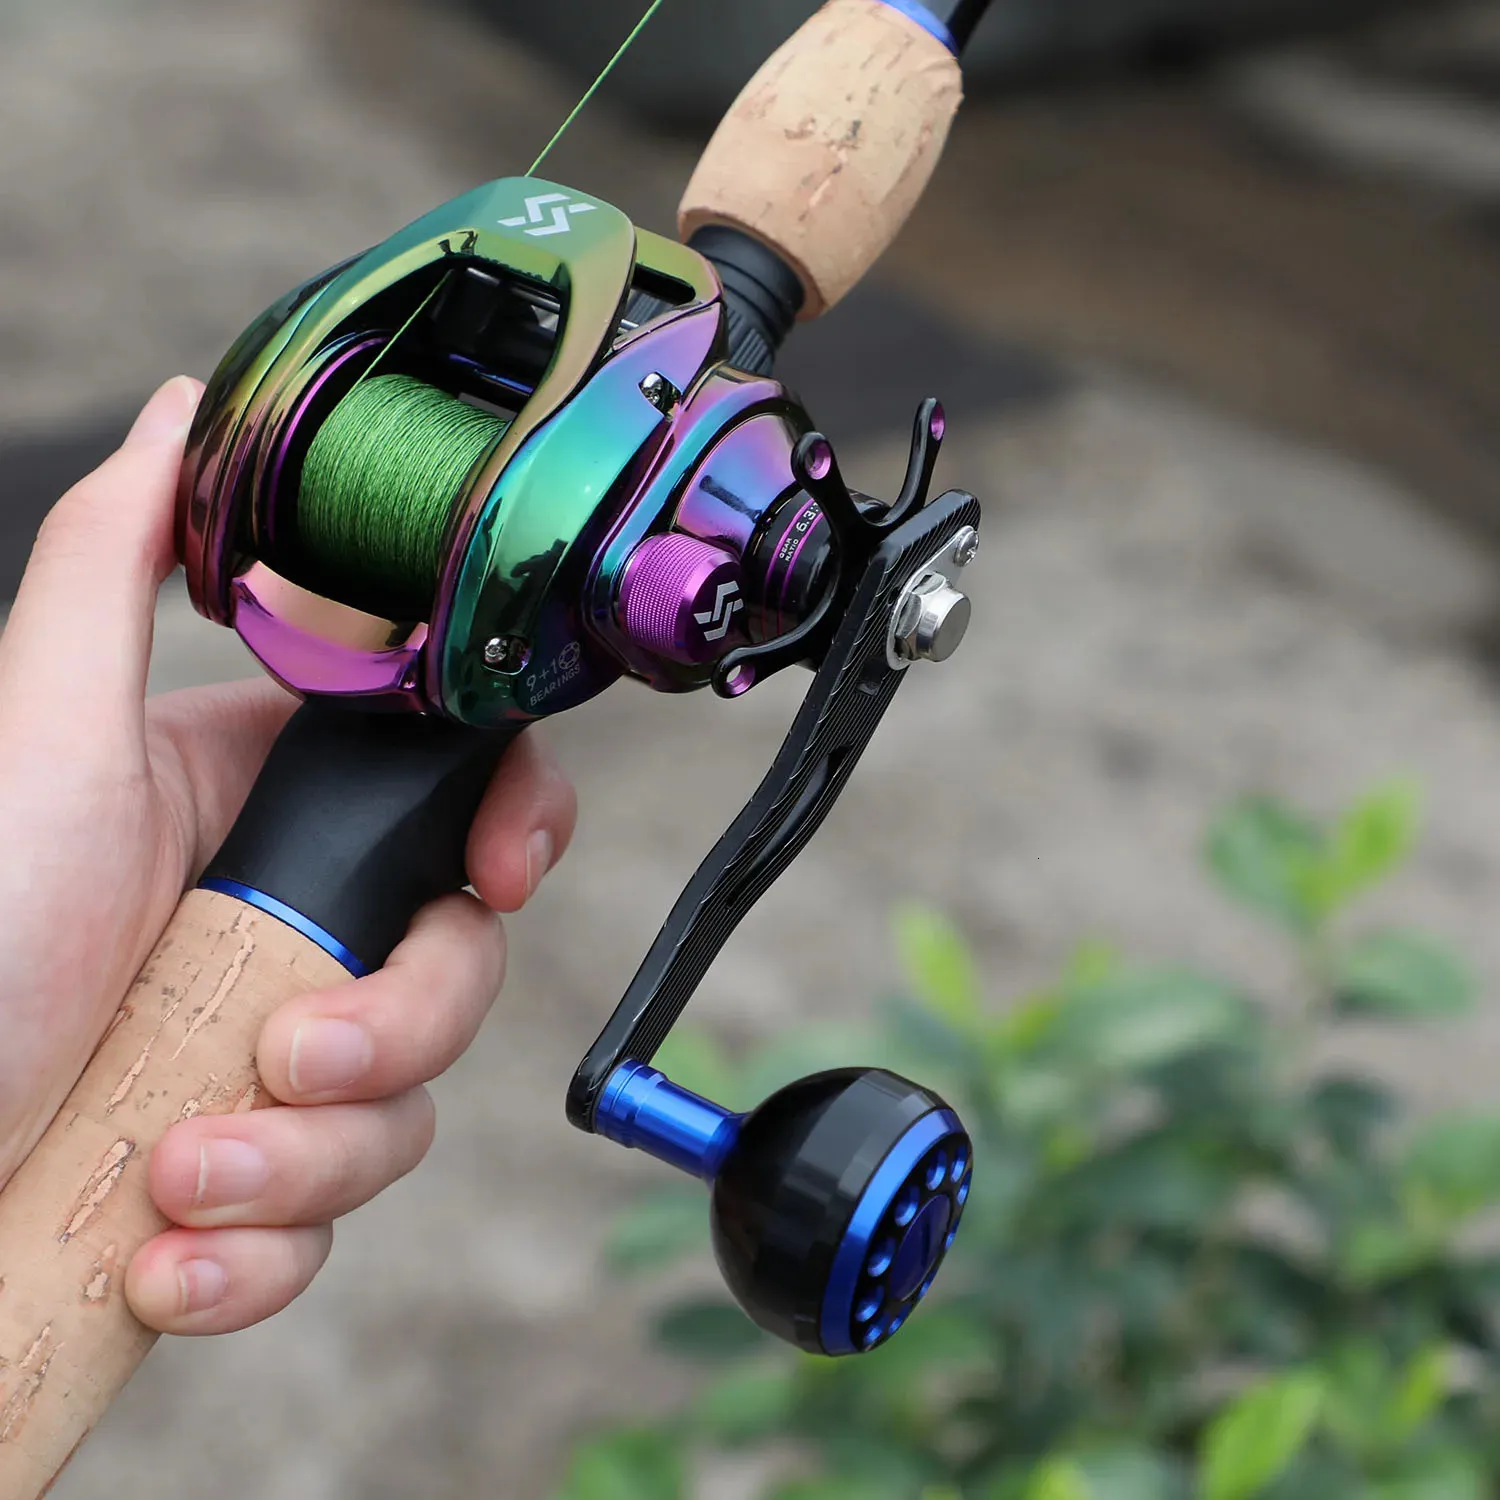 Low Profile Ultralight Baitcasting Reel With Power Handle, Metal Knob, Micro  Jigging Grip, And Fittings Replacement Parts For Bailcasting Fishing Reels  Model 231101 From You09, $8.65